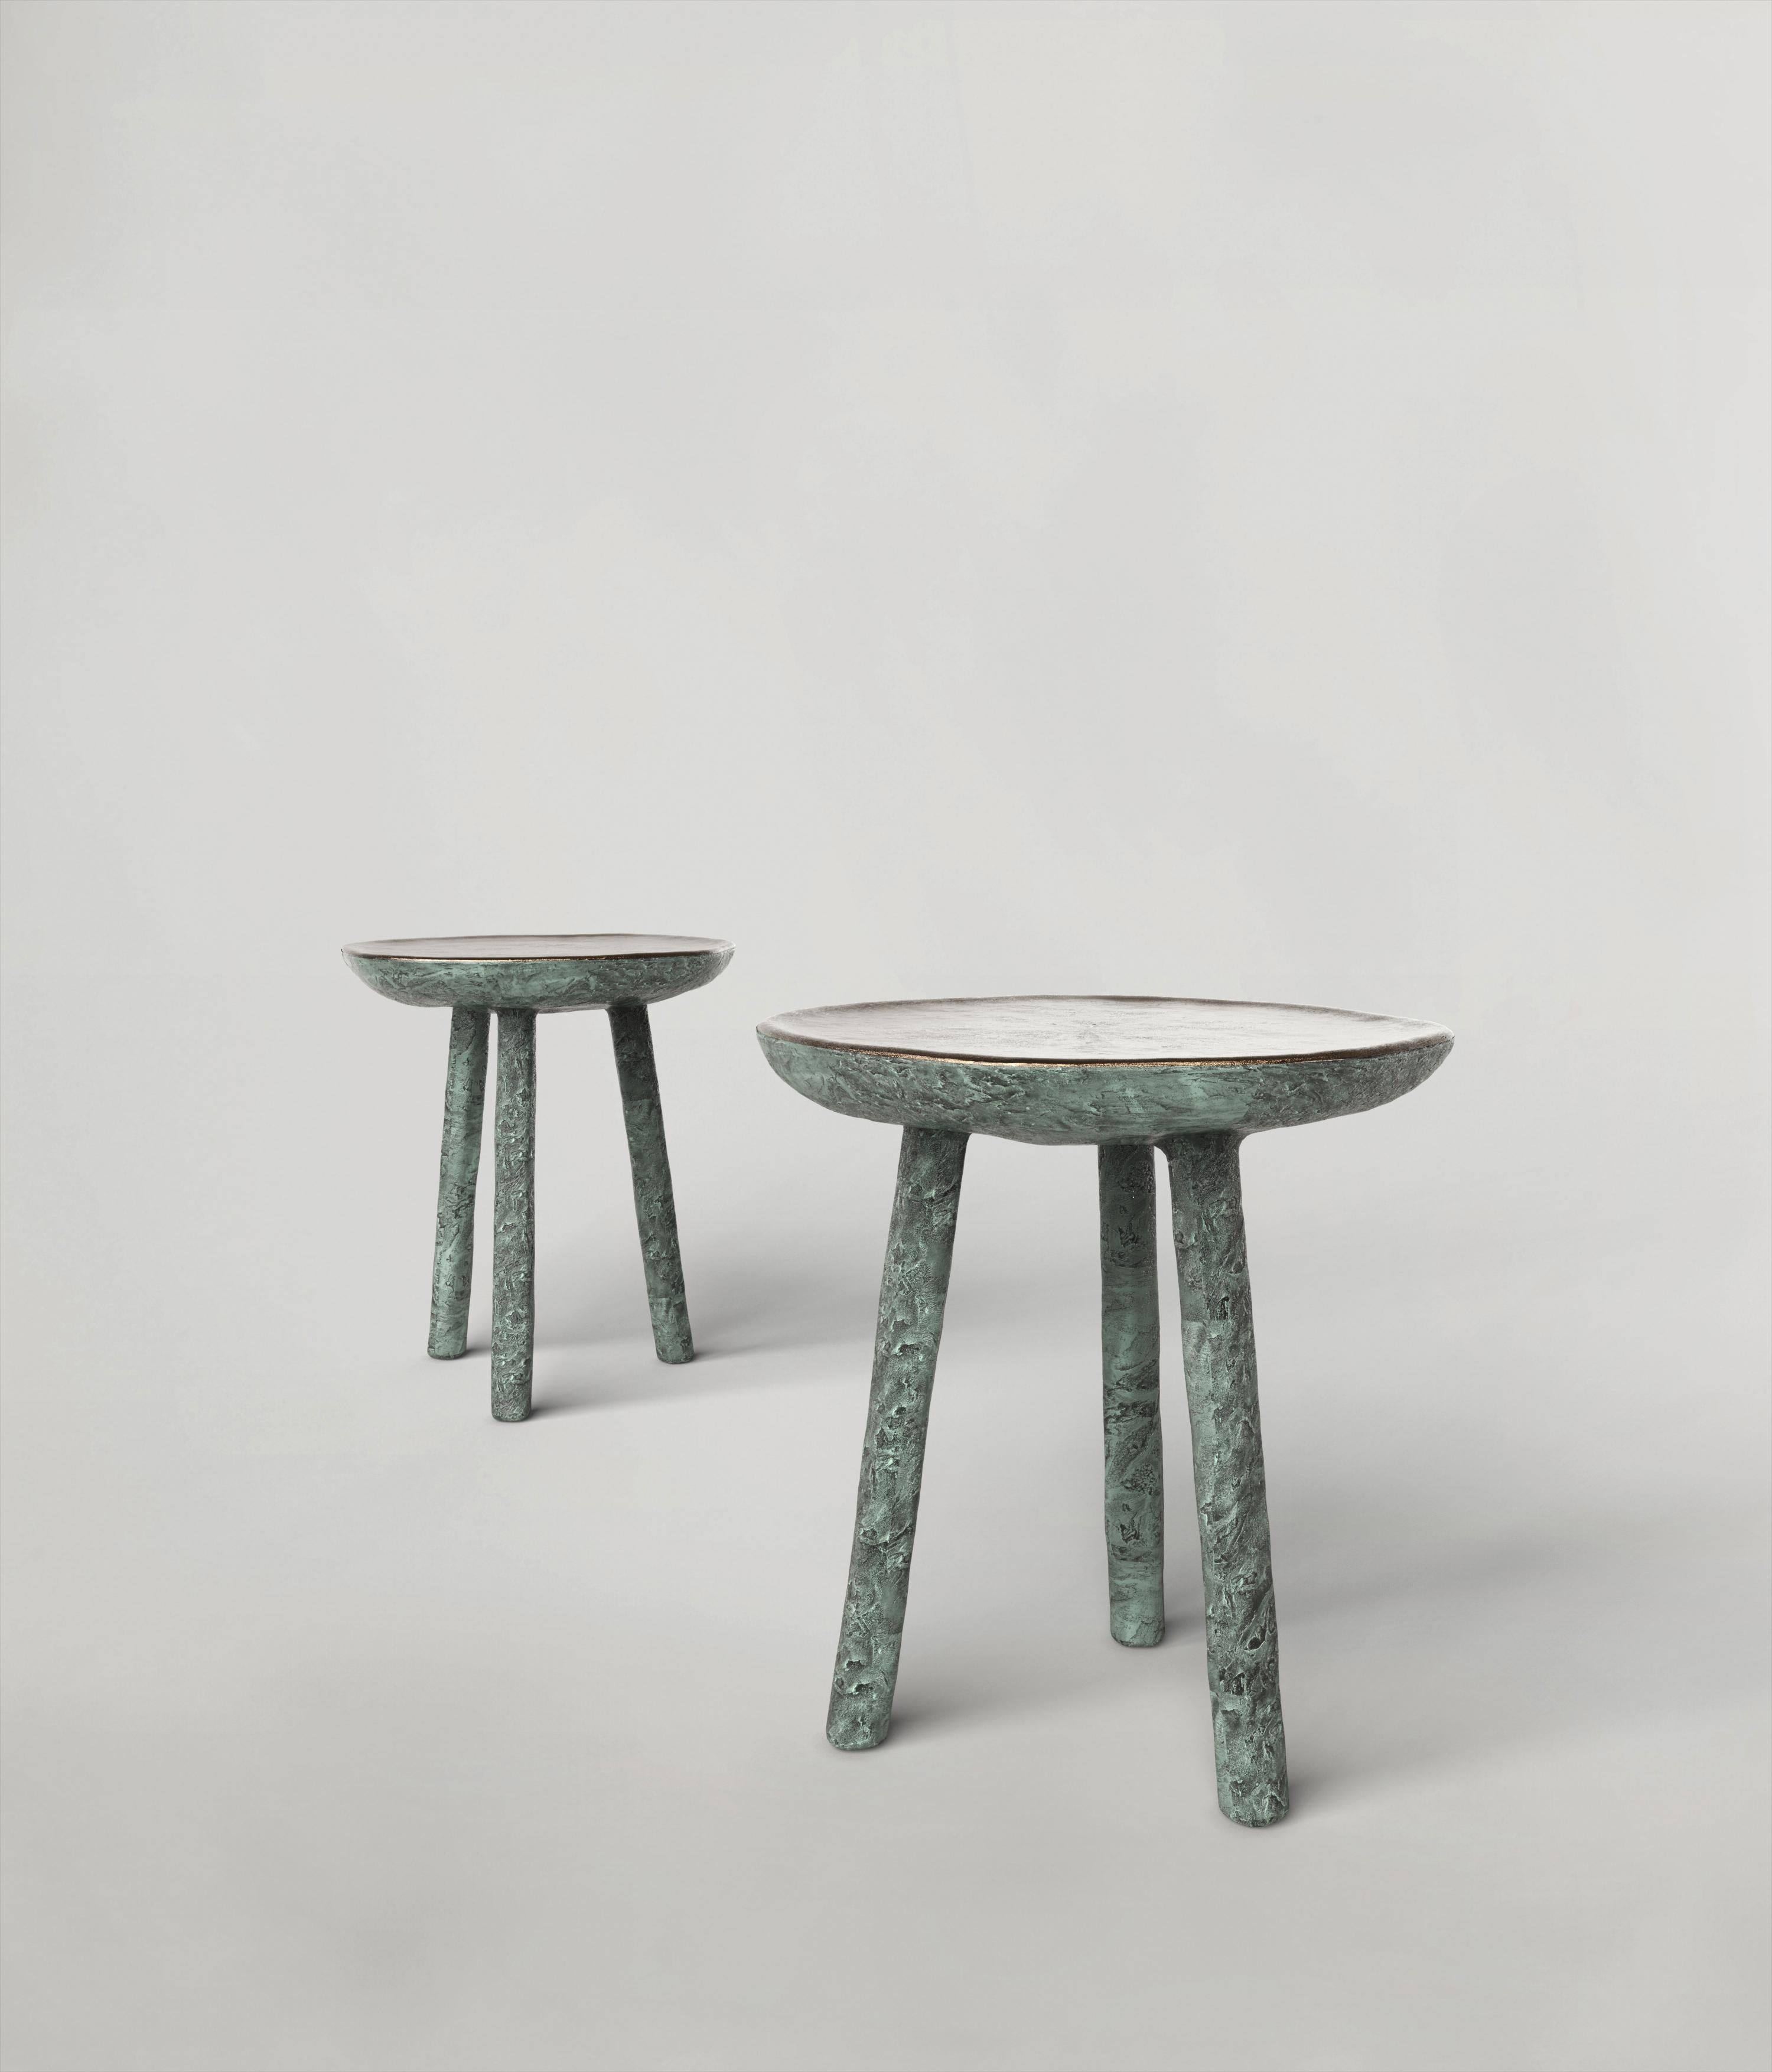 Set of 2 Comma V1 stools by Edizione Limitata
Limited edition of 150 pieces. Signed and numbered.
Dimensions: D34 x W34 x H38 cm
Materials: green patina bronze

Comma is a 21st Century collection of seatings made by Italian artisans in bronze